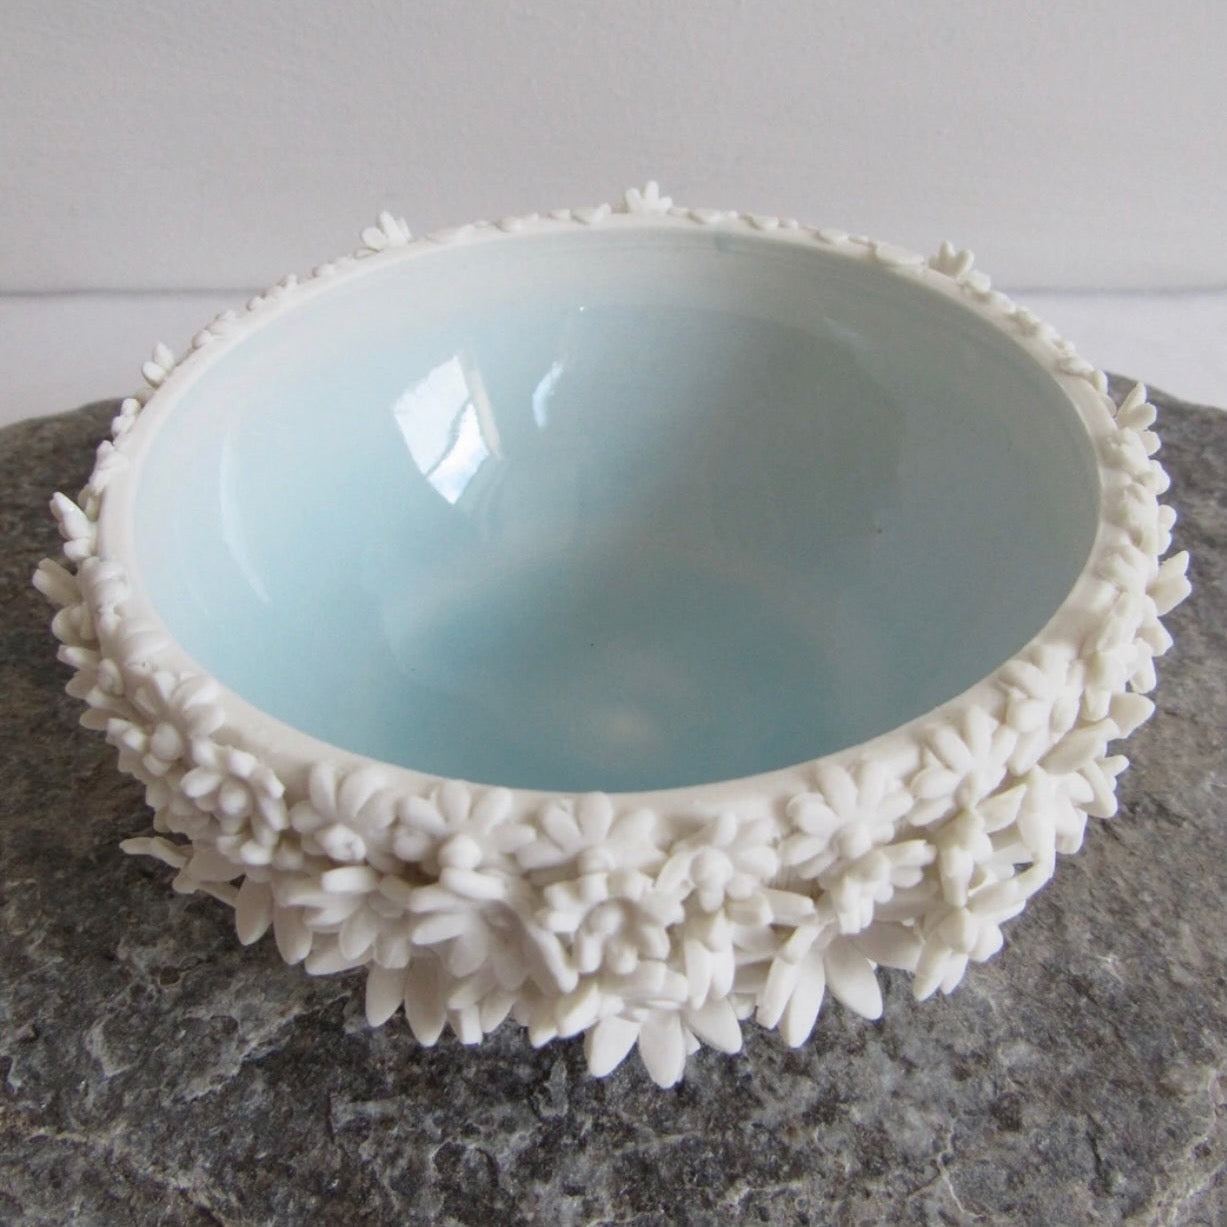 Blue bowl with white outside decorated with 3D flowers